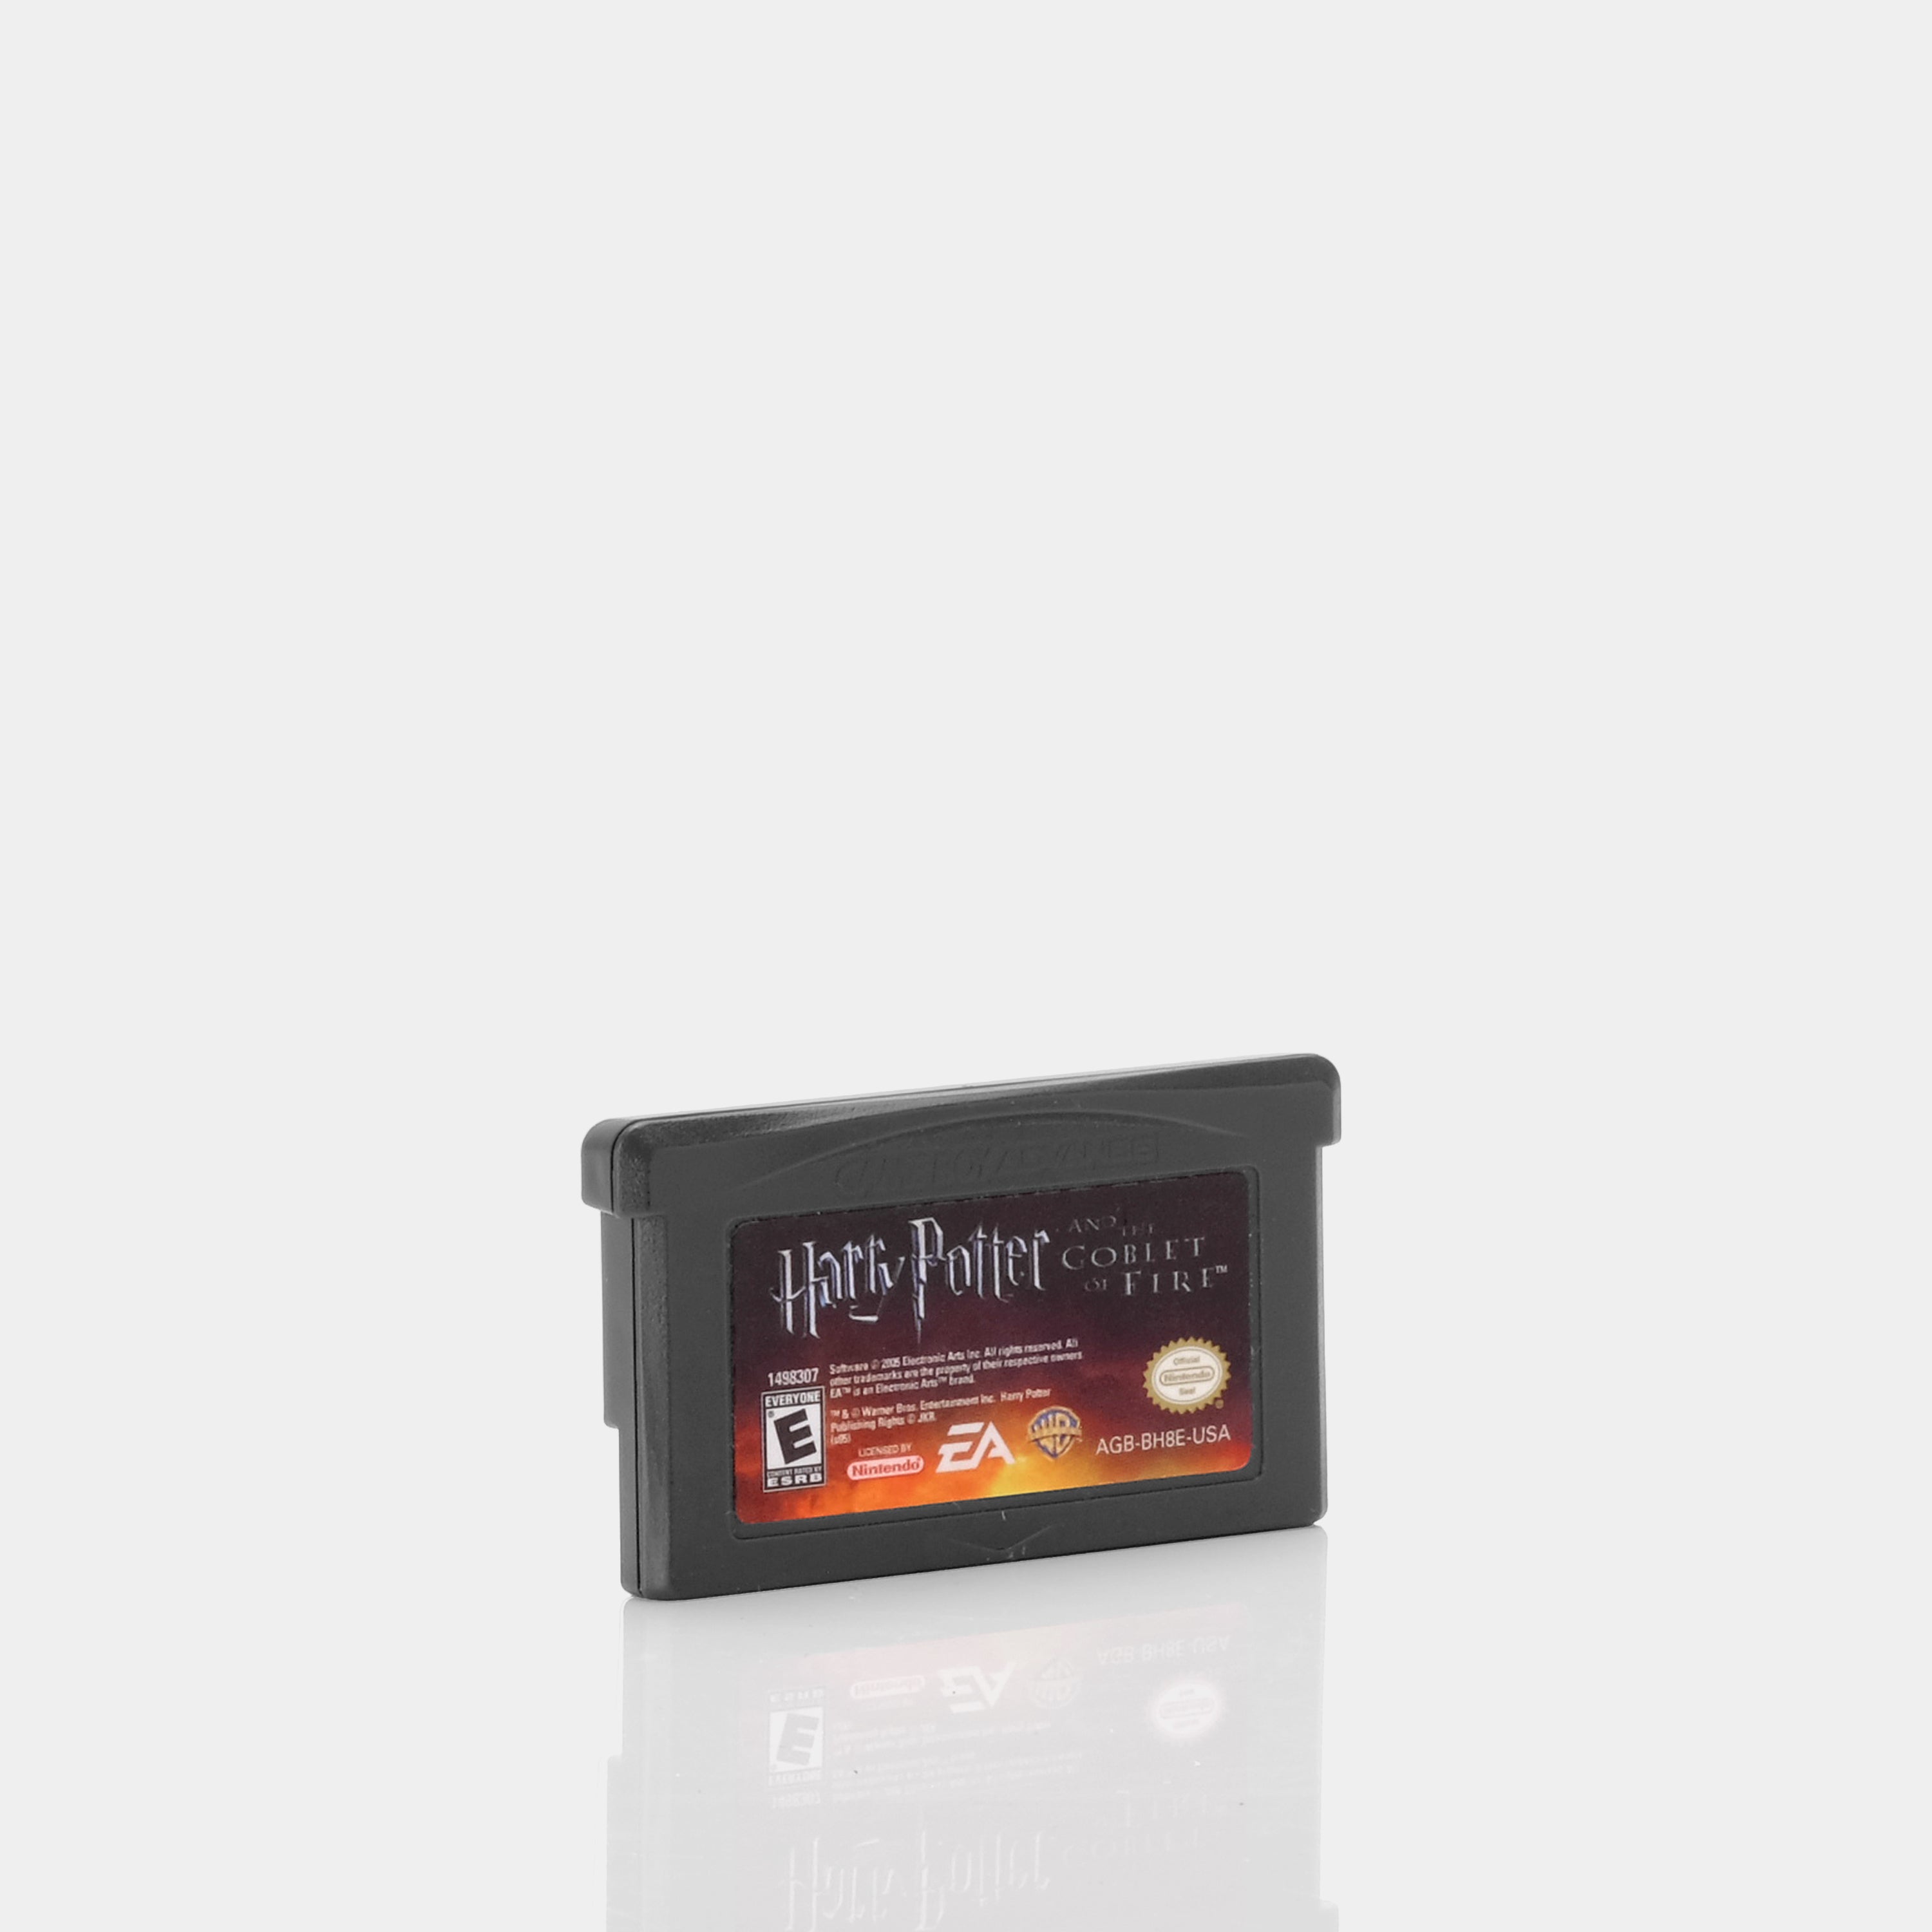 Harry Potter and the Goblet of Fire Game Boy Advance Game